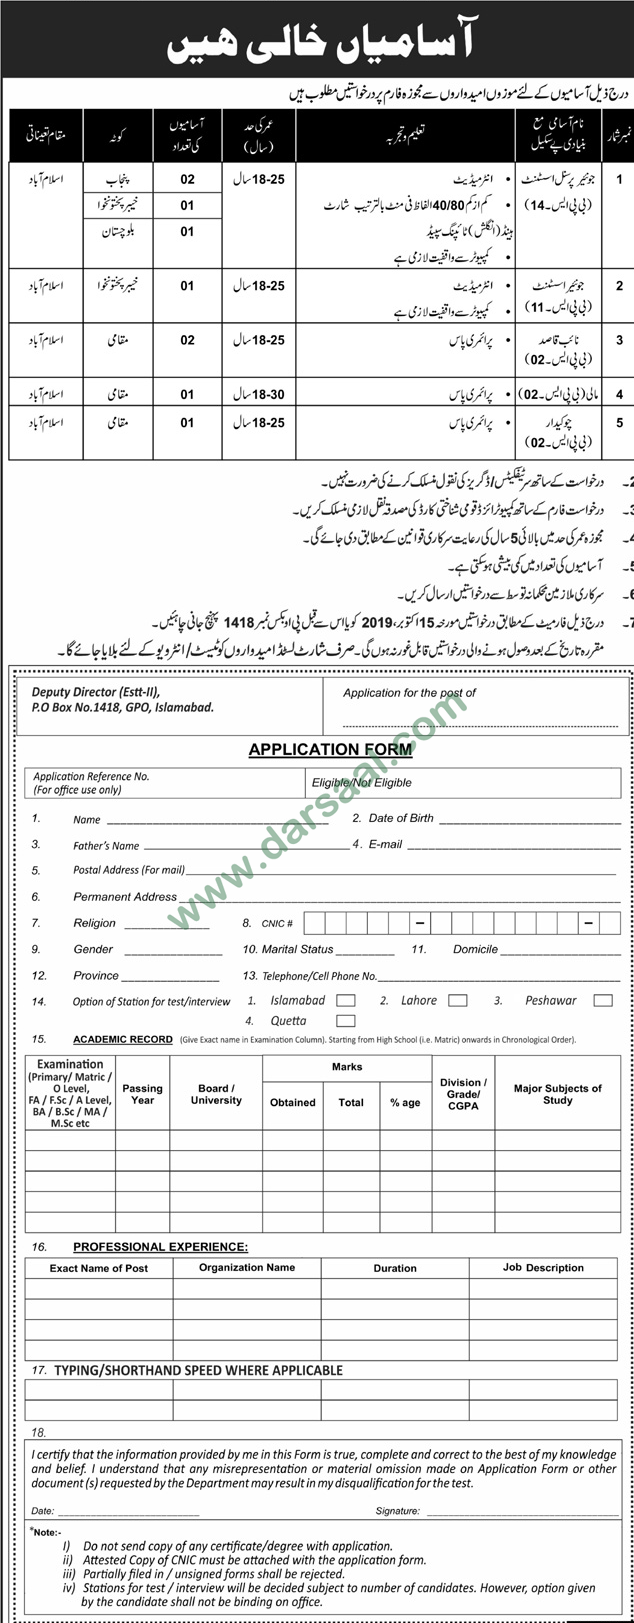 Junior Personal Assistant Jobs in Government Departments in Lahore - Sep 29, 2019